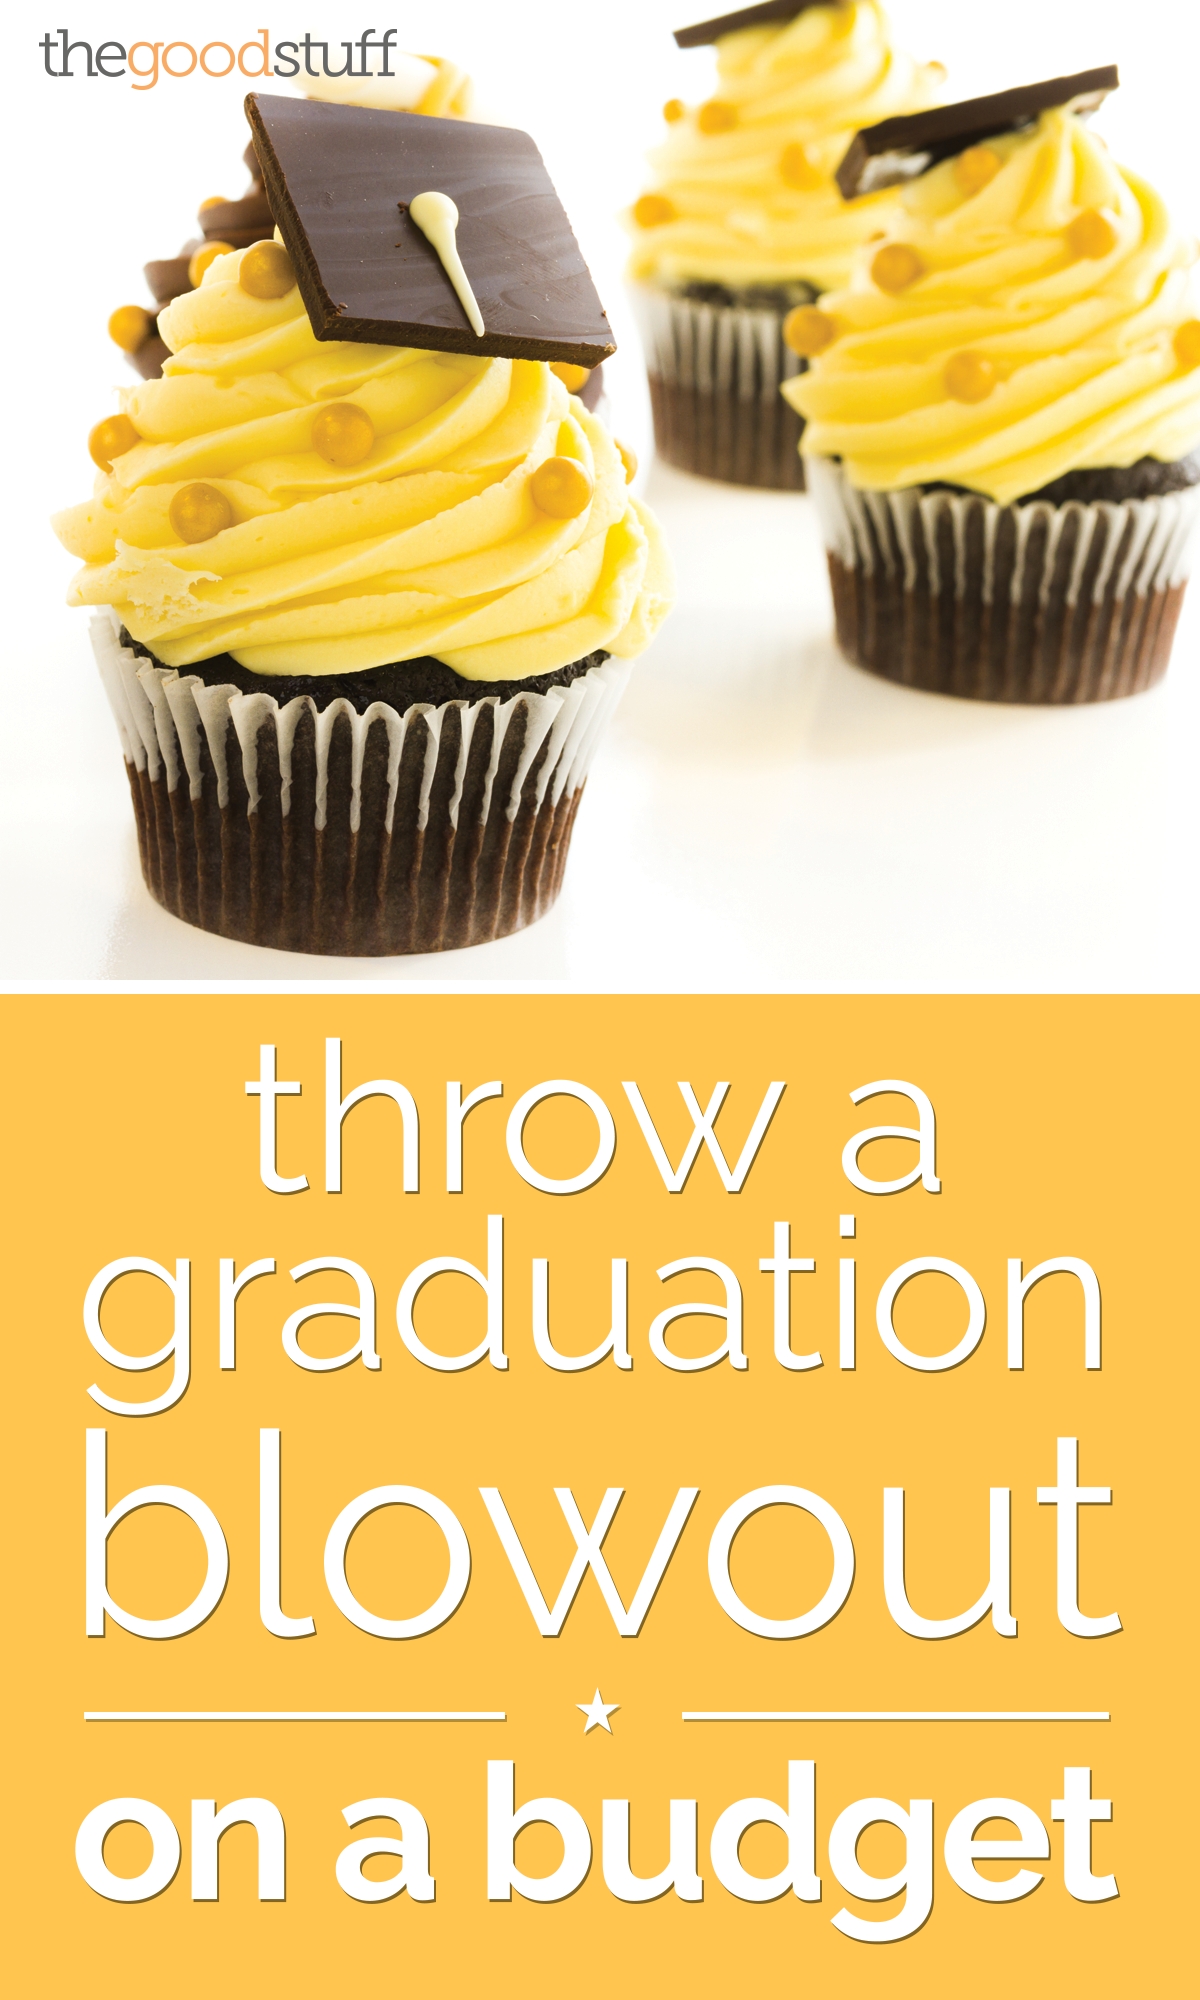 10 Nice Graduation Party Food Ideas Cheap throw a graduation party blowout on a budget thegoodstuff 2022